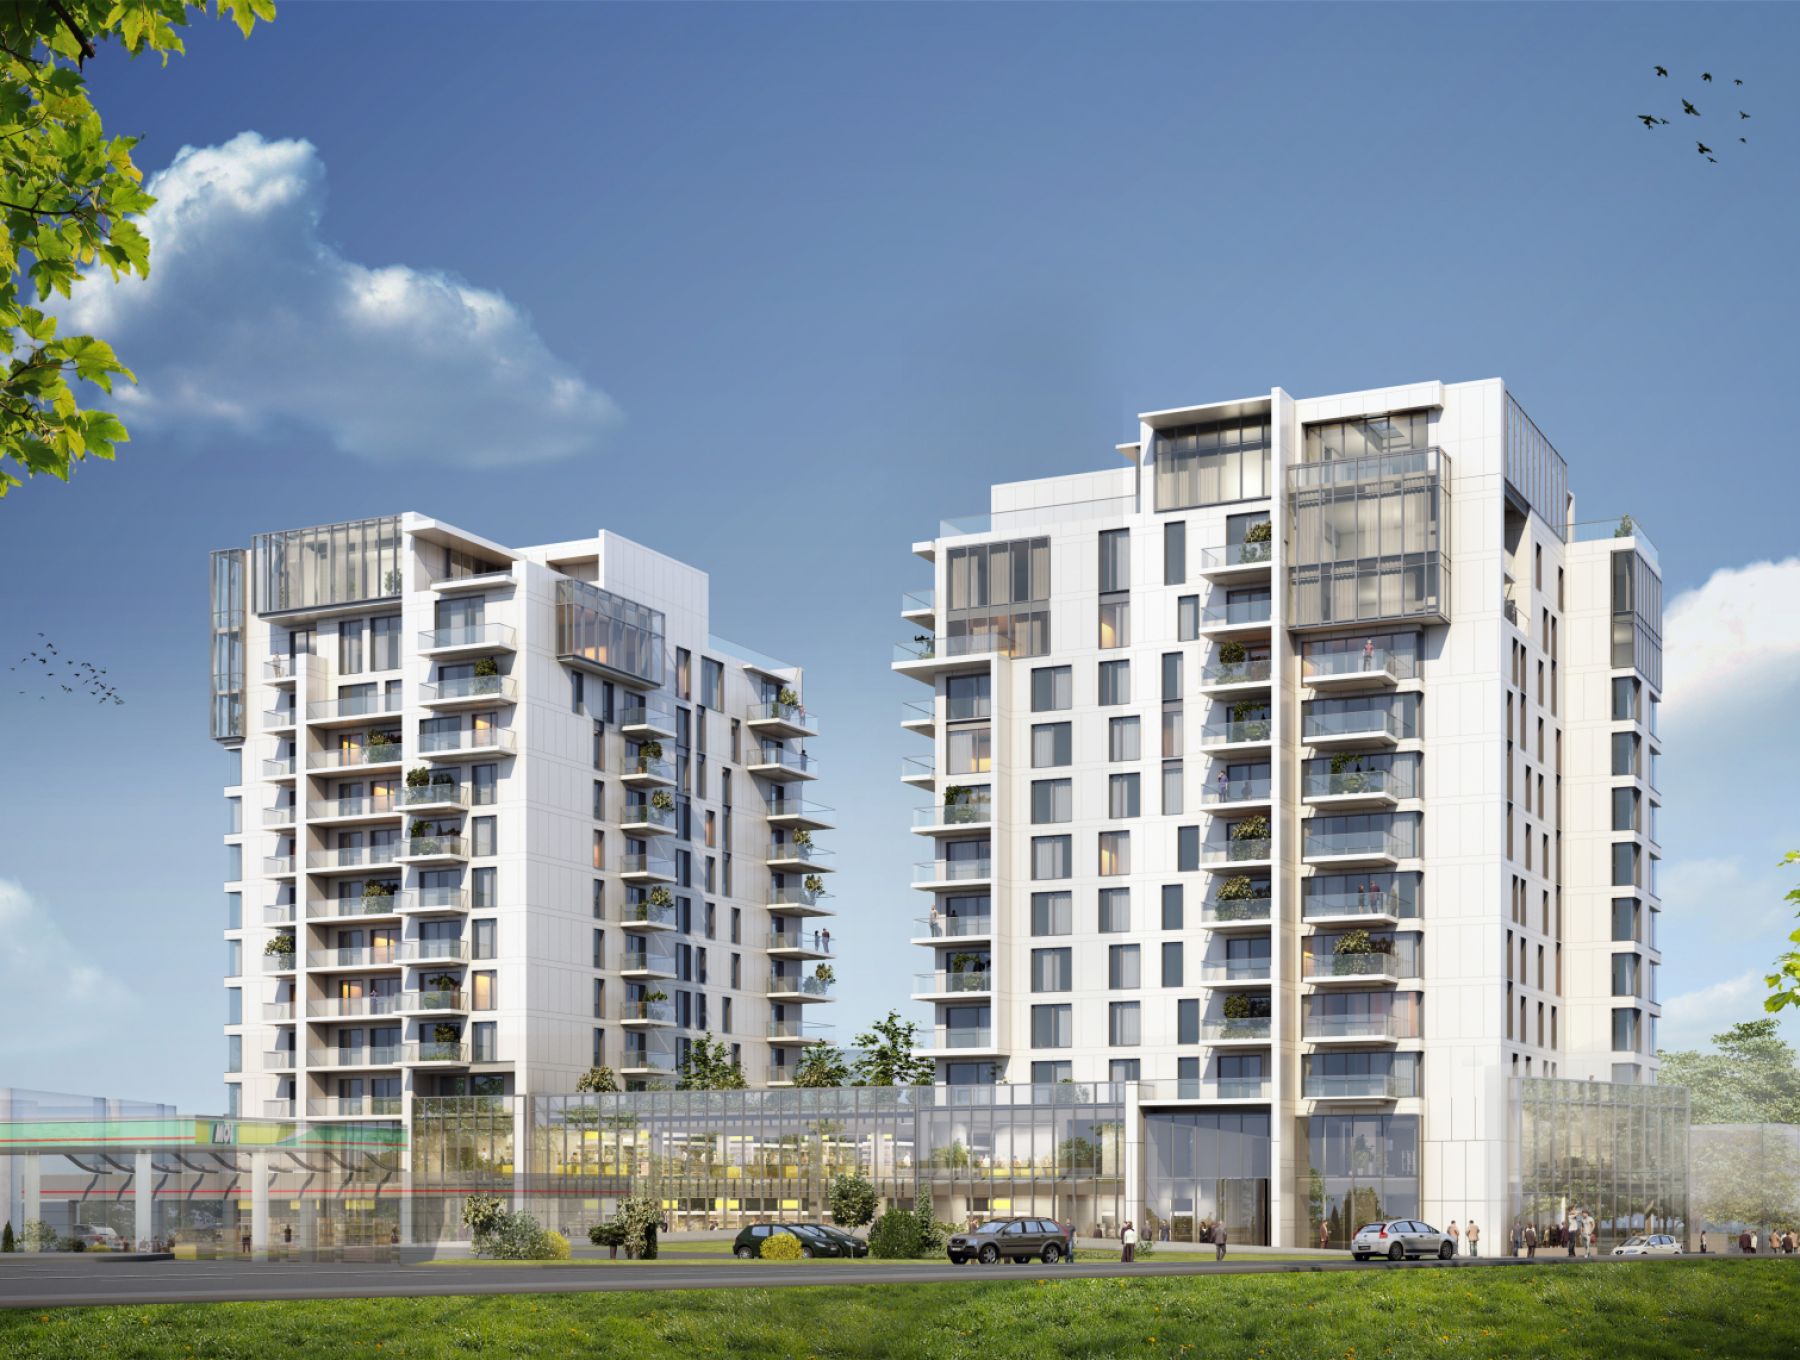 One Herăstrău Towers, on ZF cover: the most important residential development in Herăstrău, to be completed this year